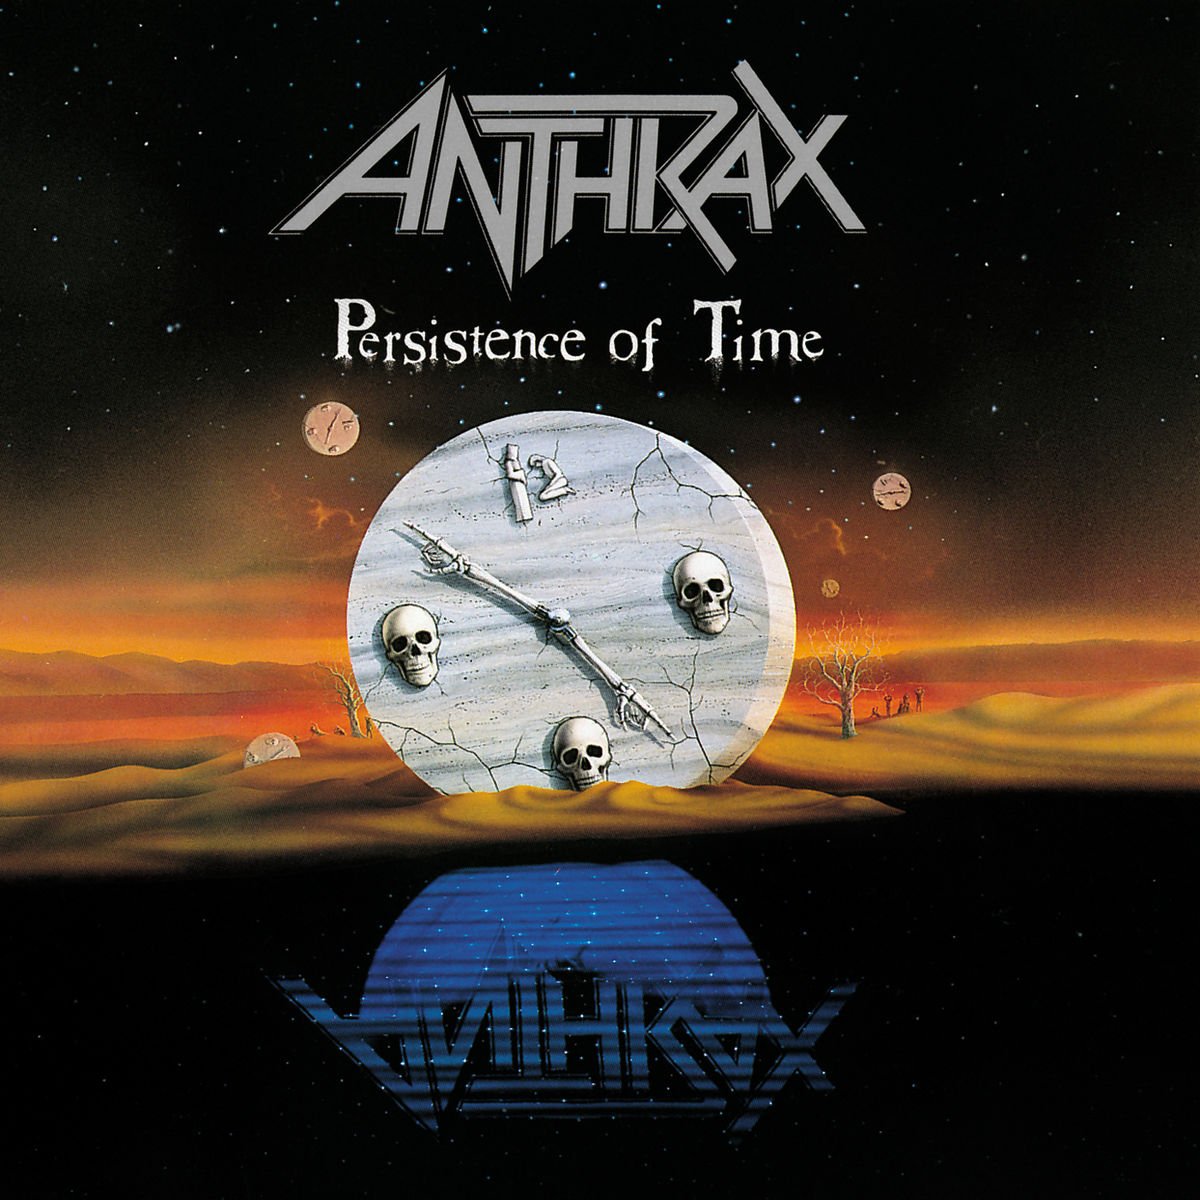 CD Anthrax - Persistence of time